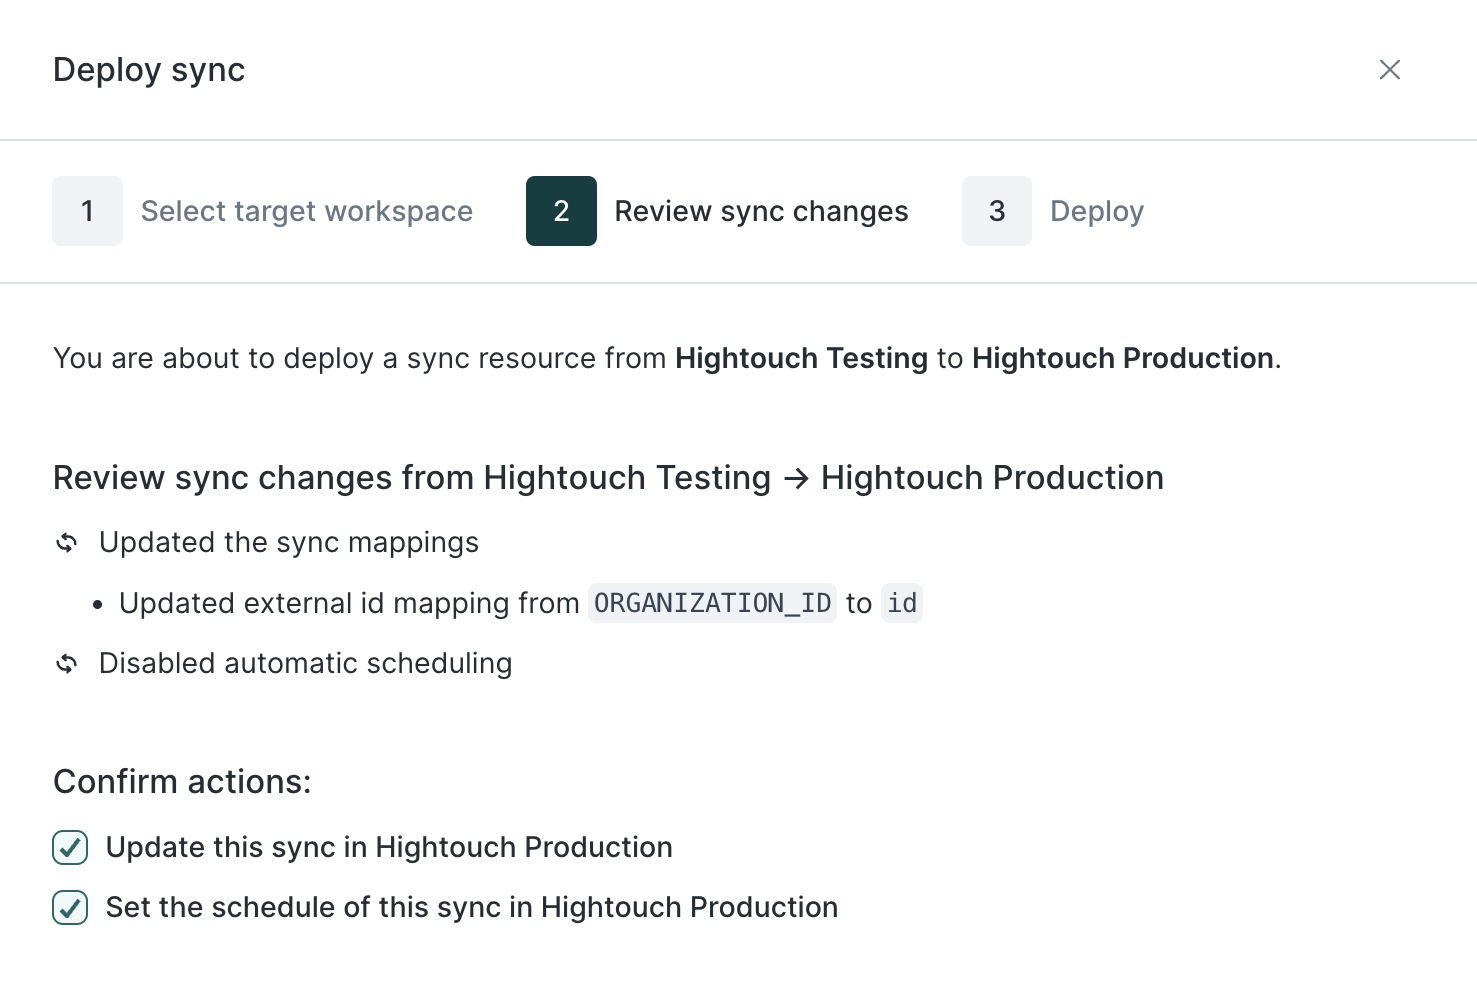 Review changes before deploying a sync